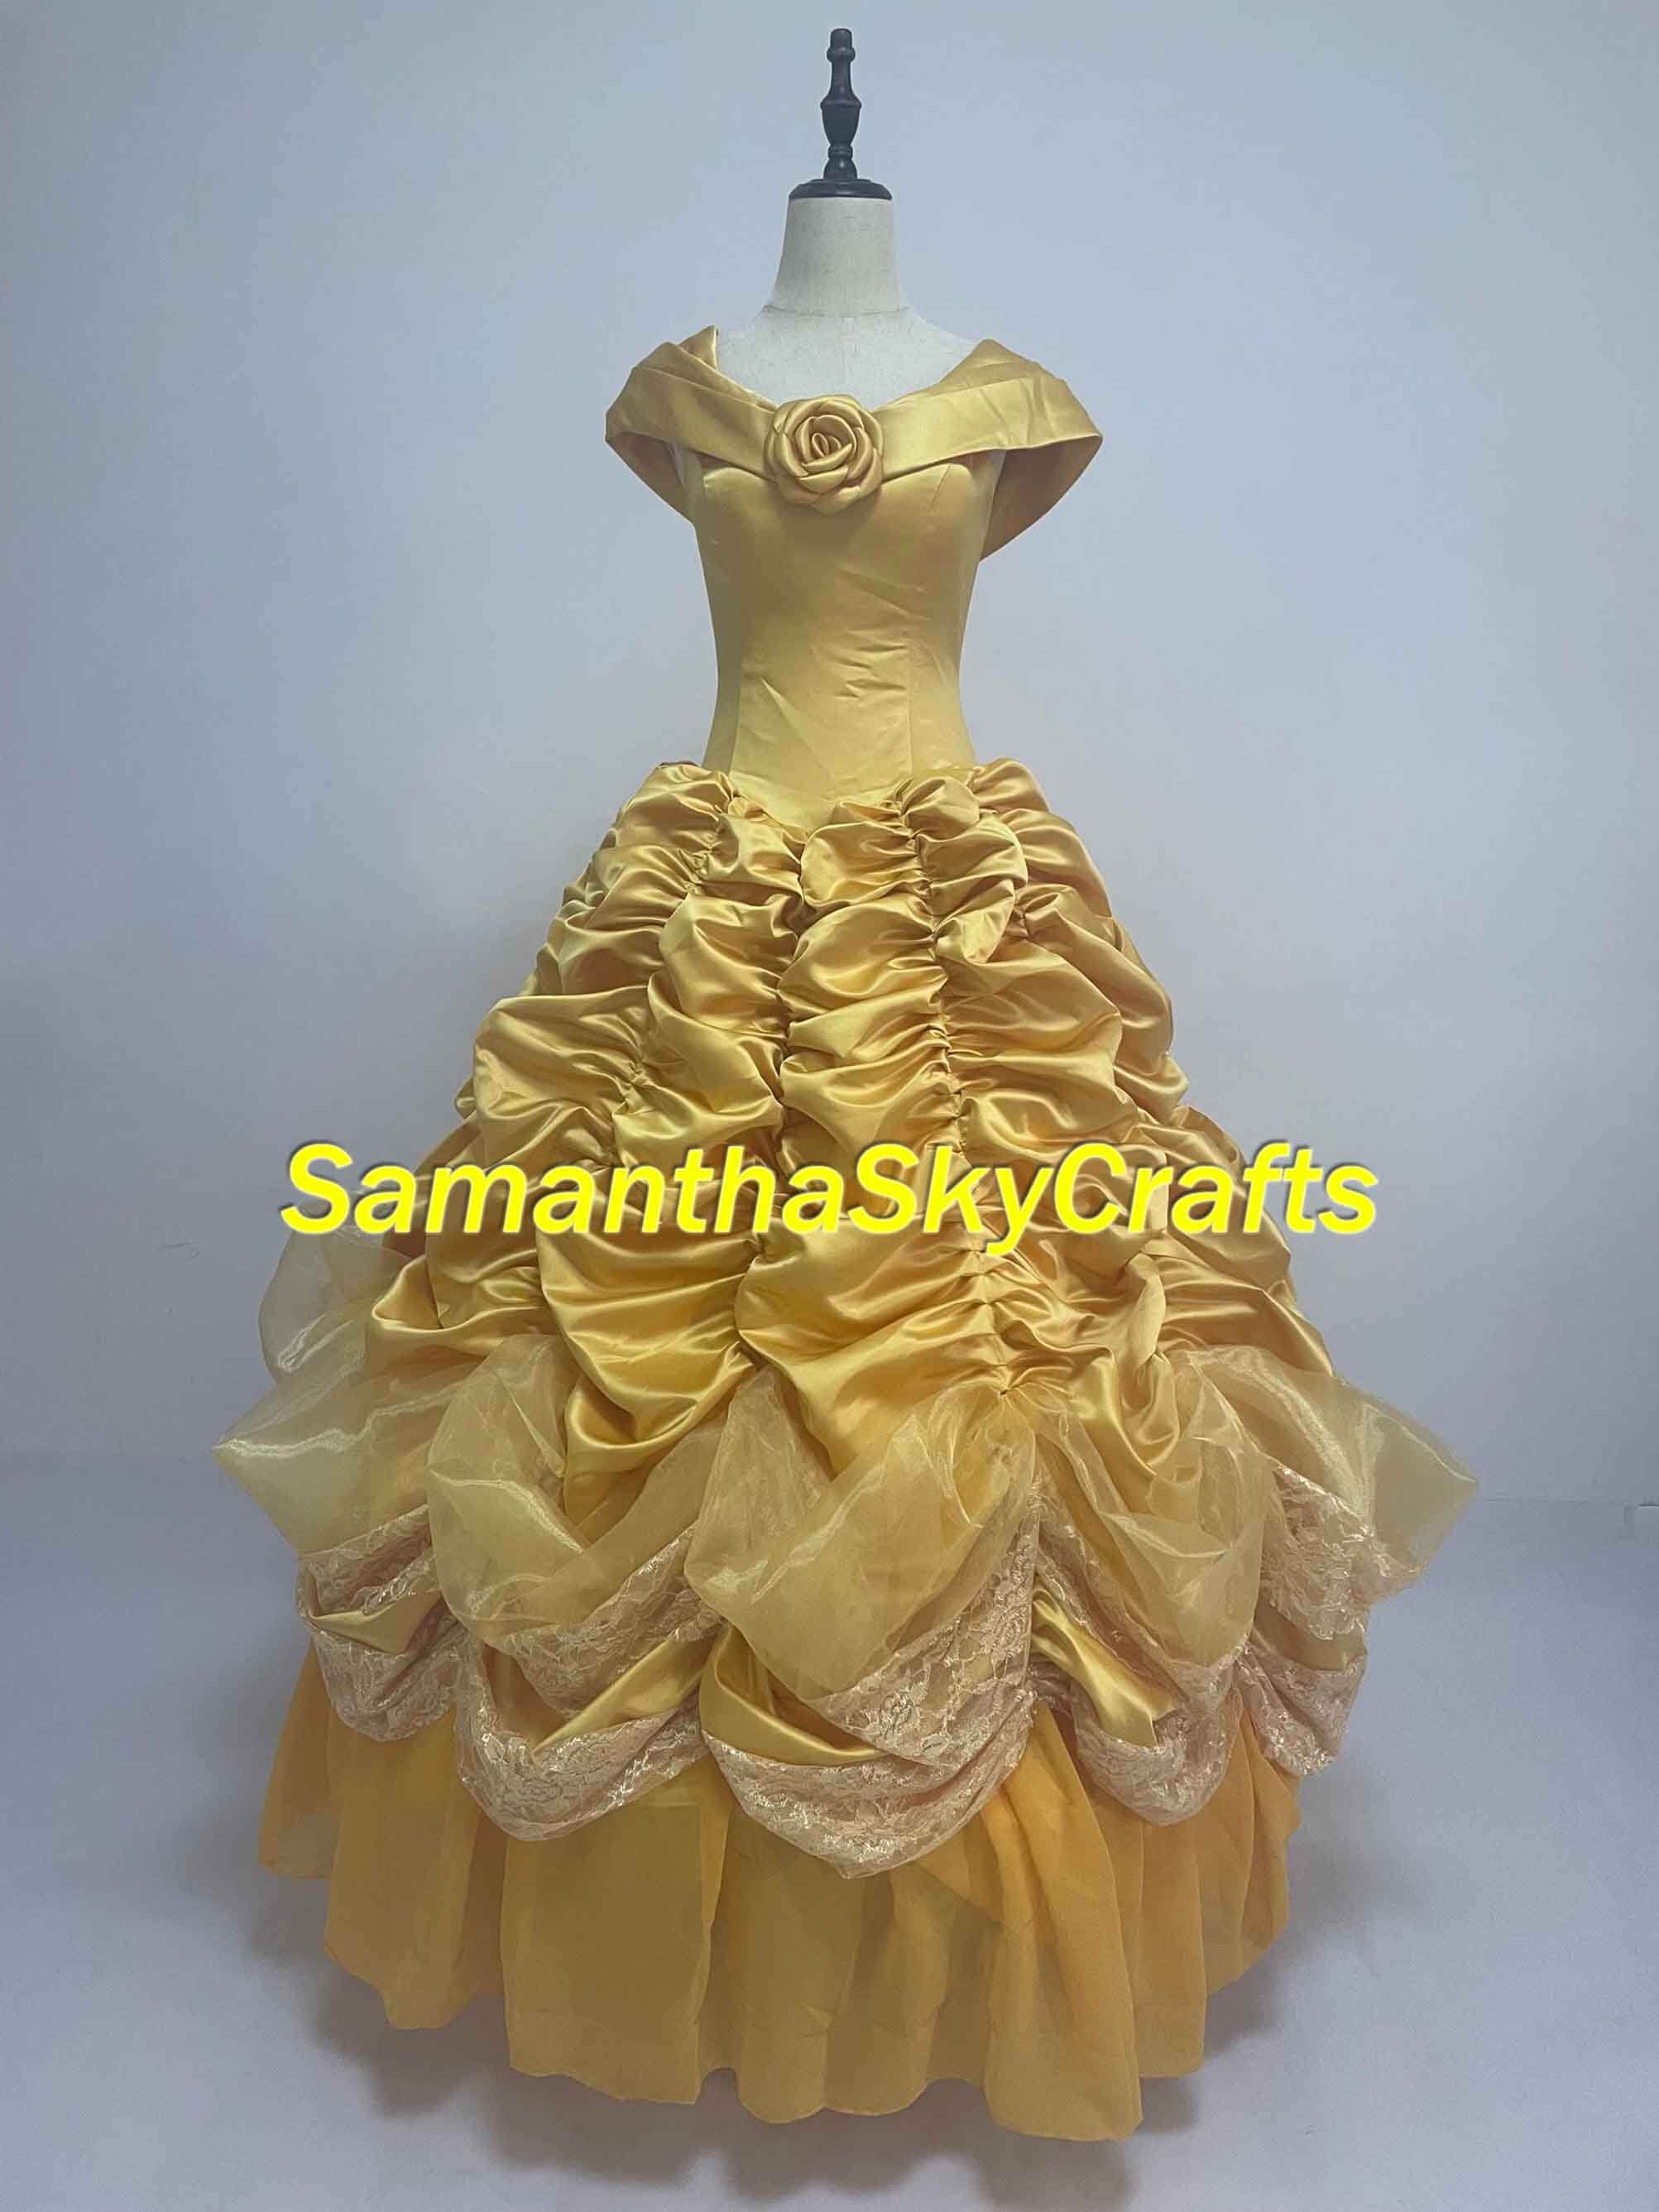 CUSTOM SIZE Belle Costume Rave Bra Outfit Adult Sexy Halloween Belly Dance  Cosplay Disney Princess Beauty and the Beast Yellow Costume 